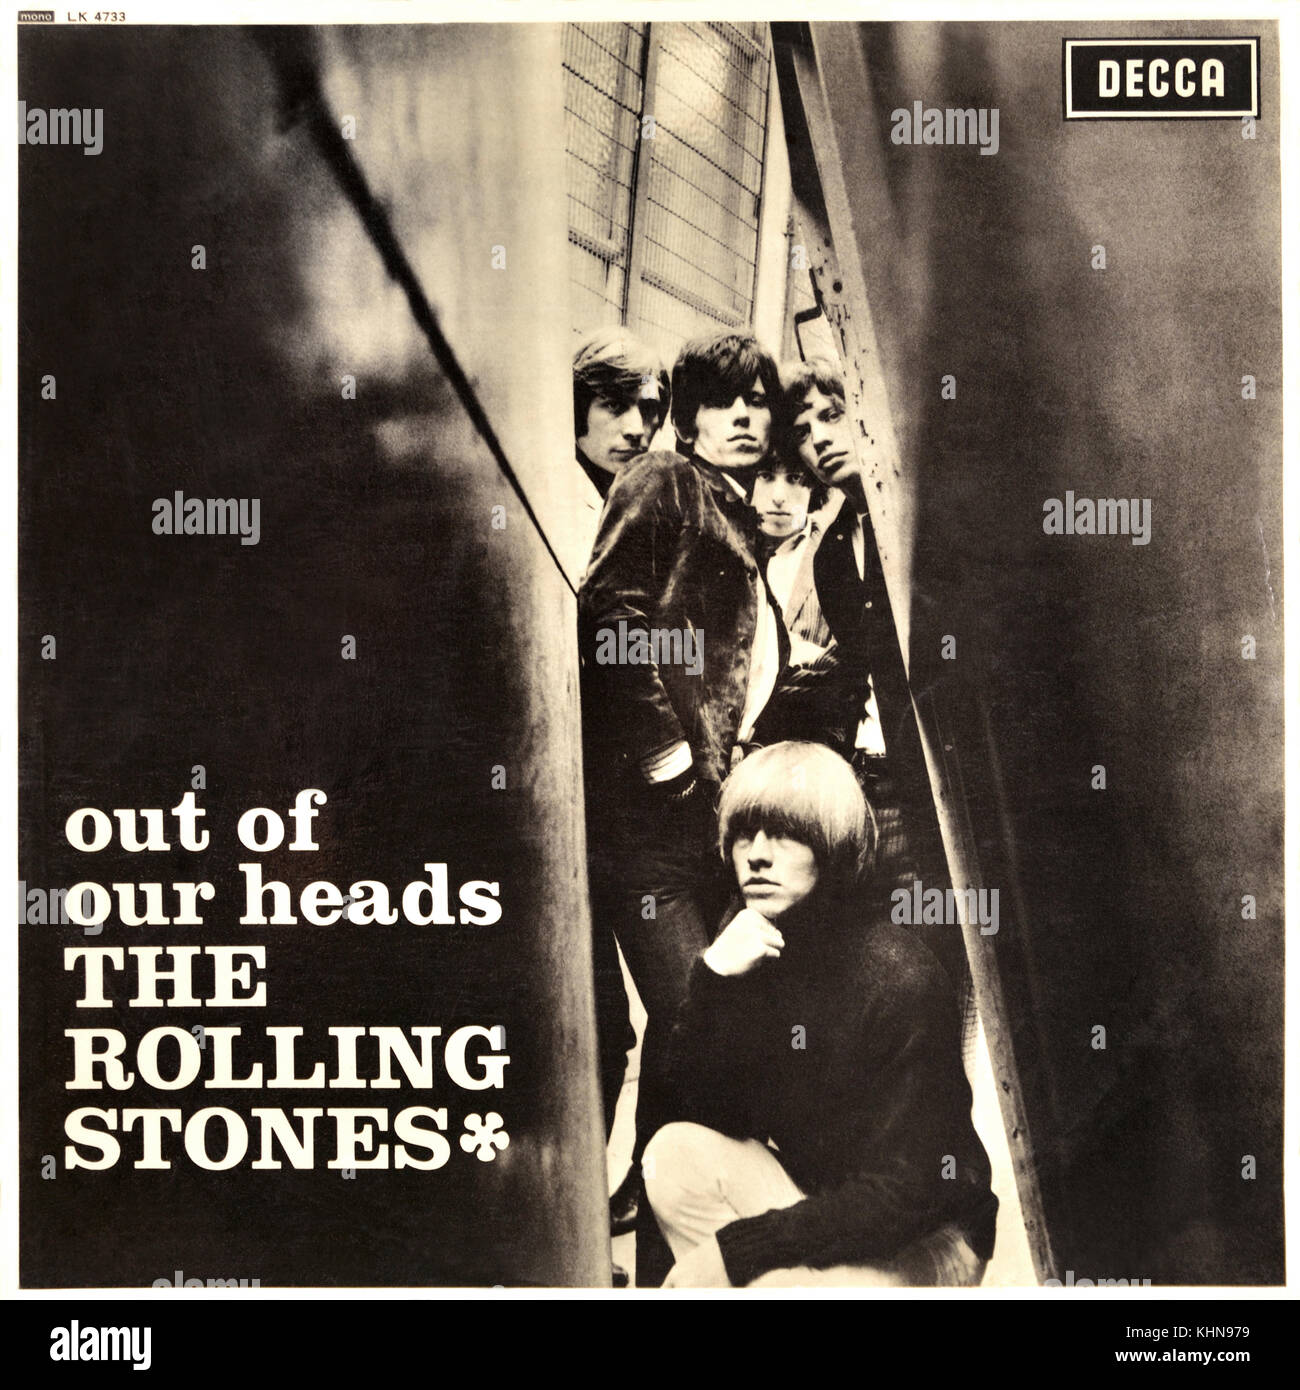 The Rolling Stones - original Vinyl Album Cover - Out of Our Heads - 1965 Stockfoto